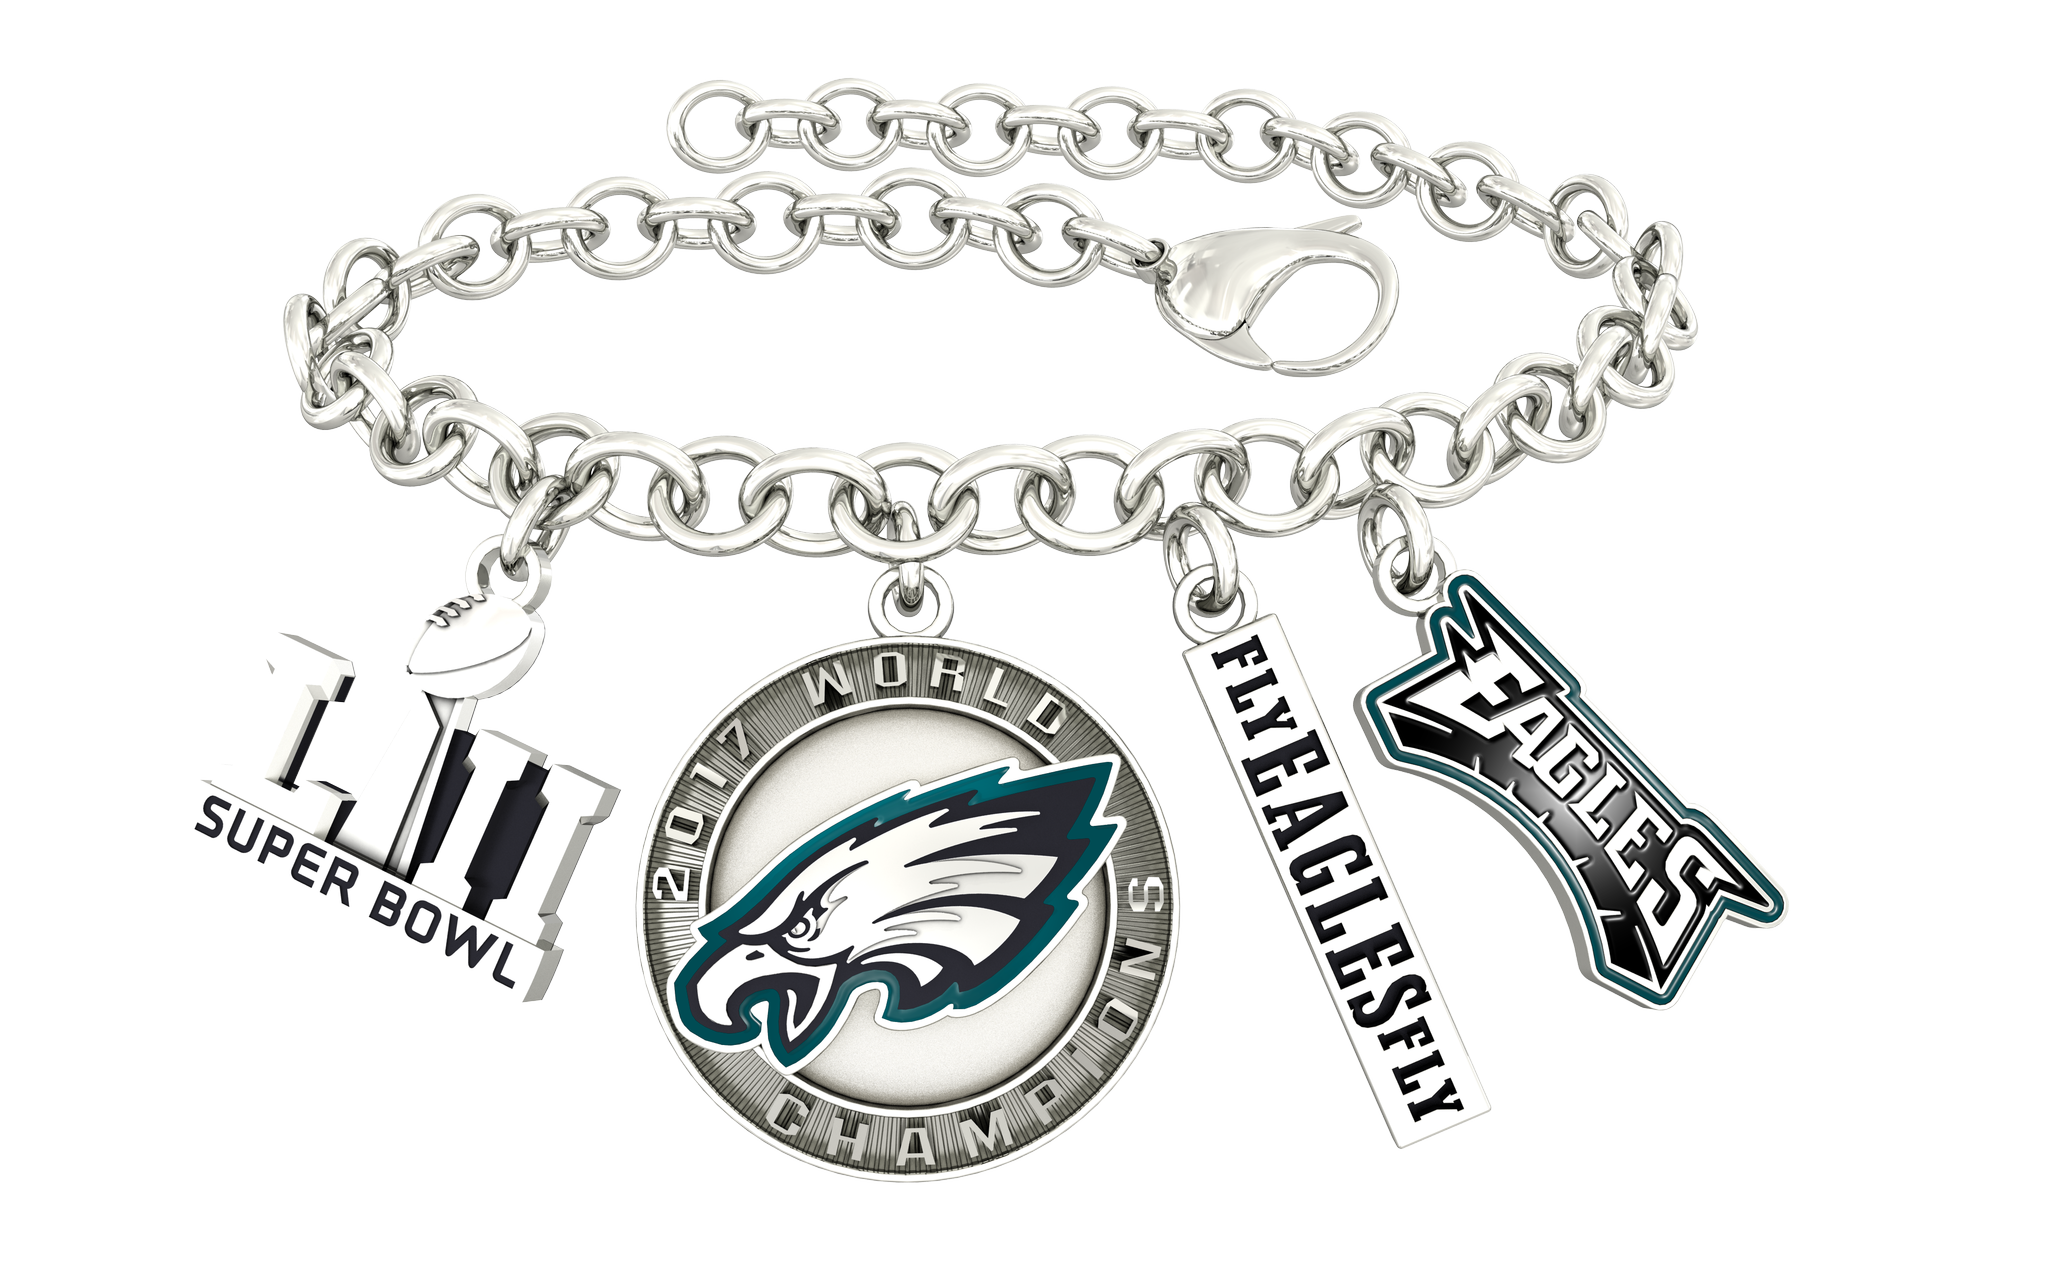 Fake Super Bowl rings for Eagles, other teams seized by federal authorities